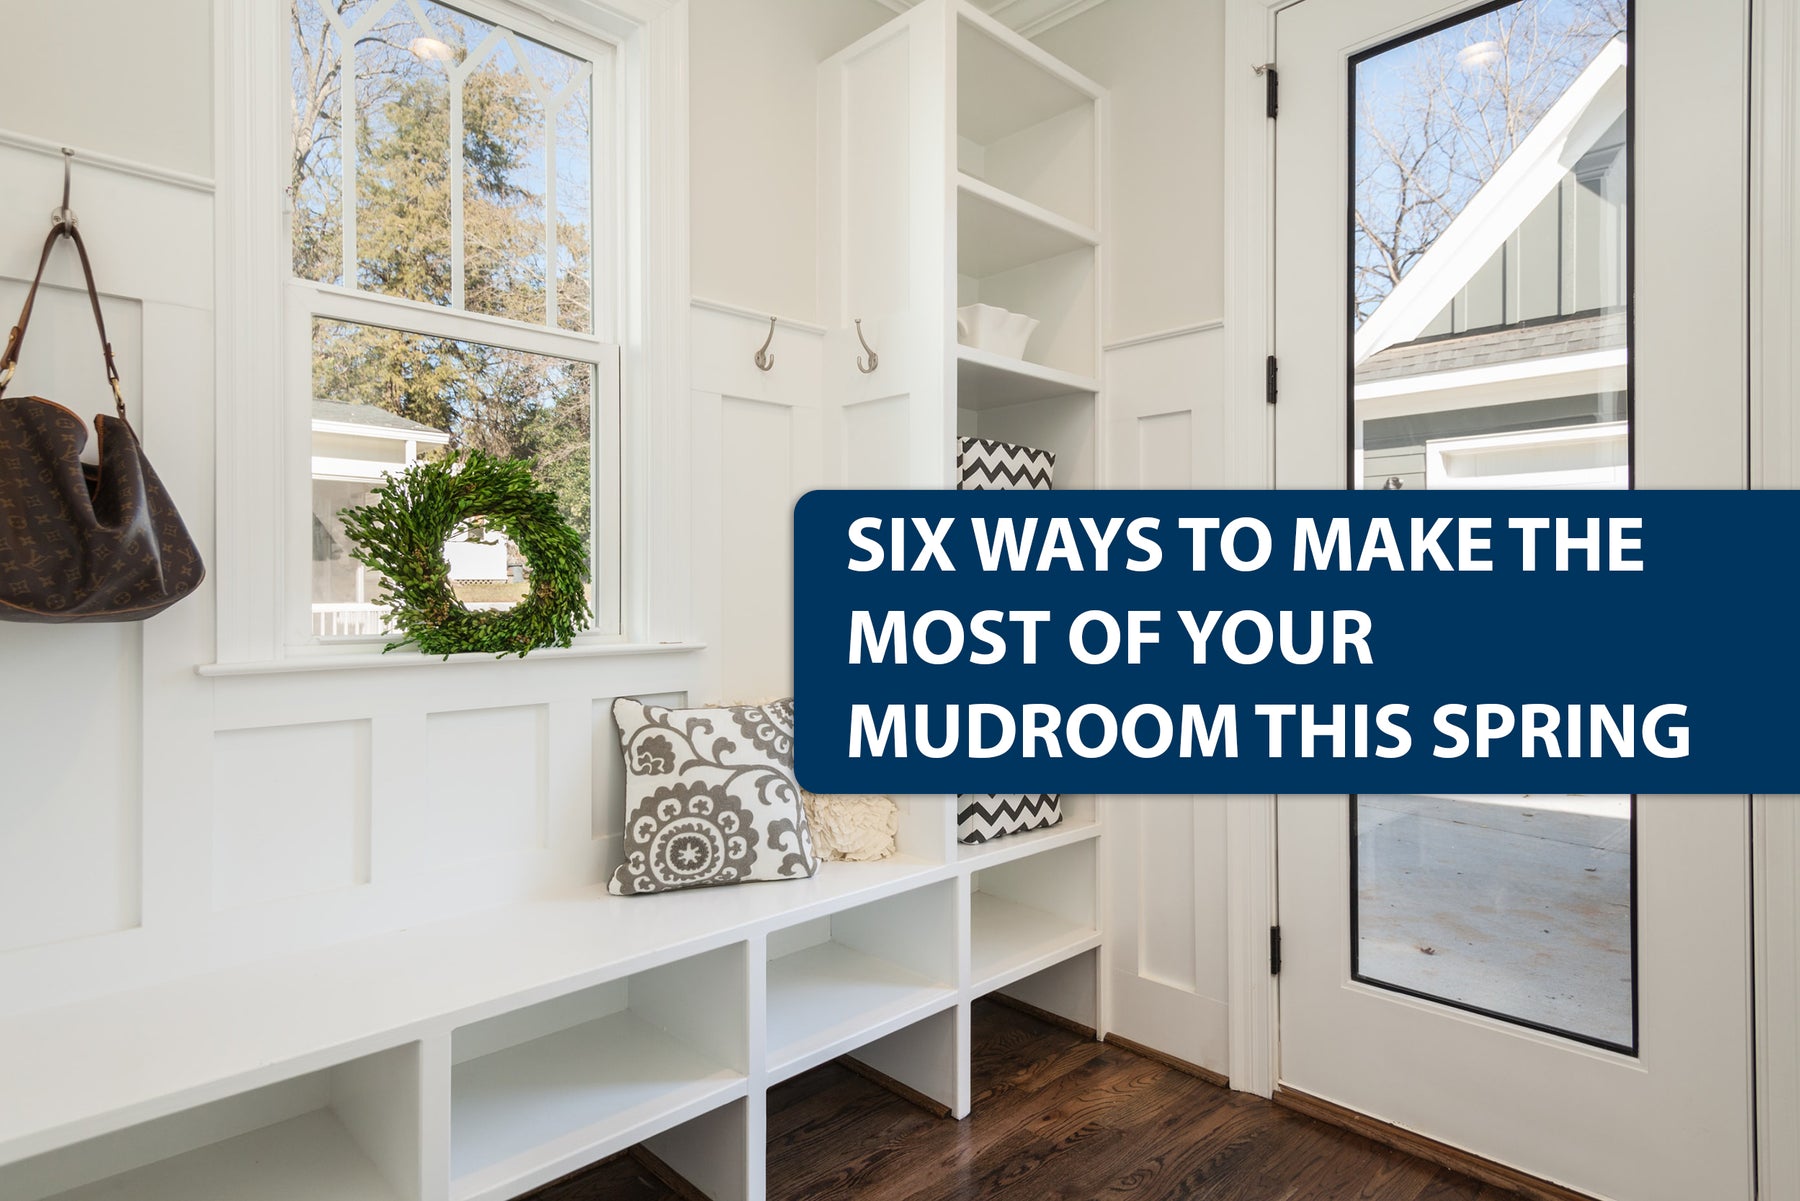 Six Ways to Make the Most of Your Mudroom This Spring